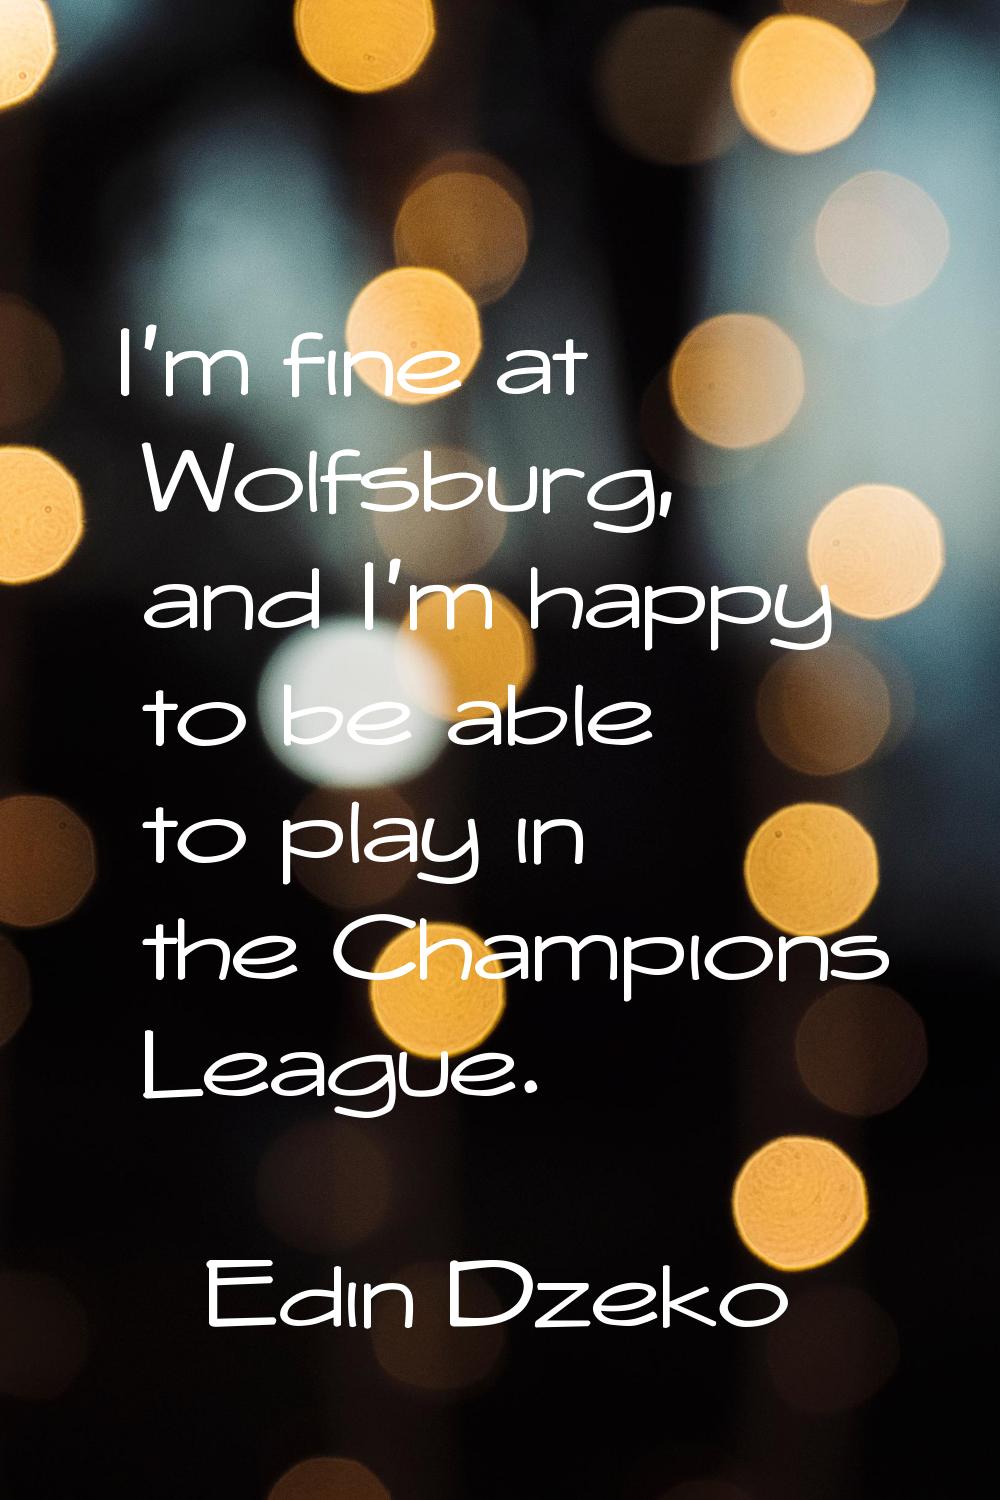 I'm fine at Wolfsburg, and I'm happy to be able to play in the Champions League.